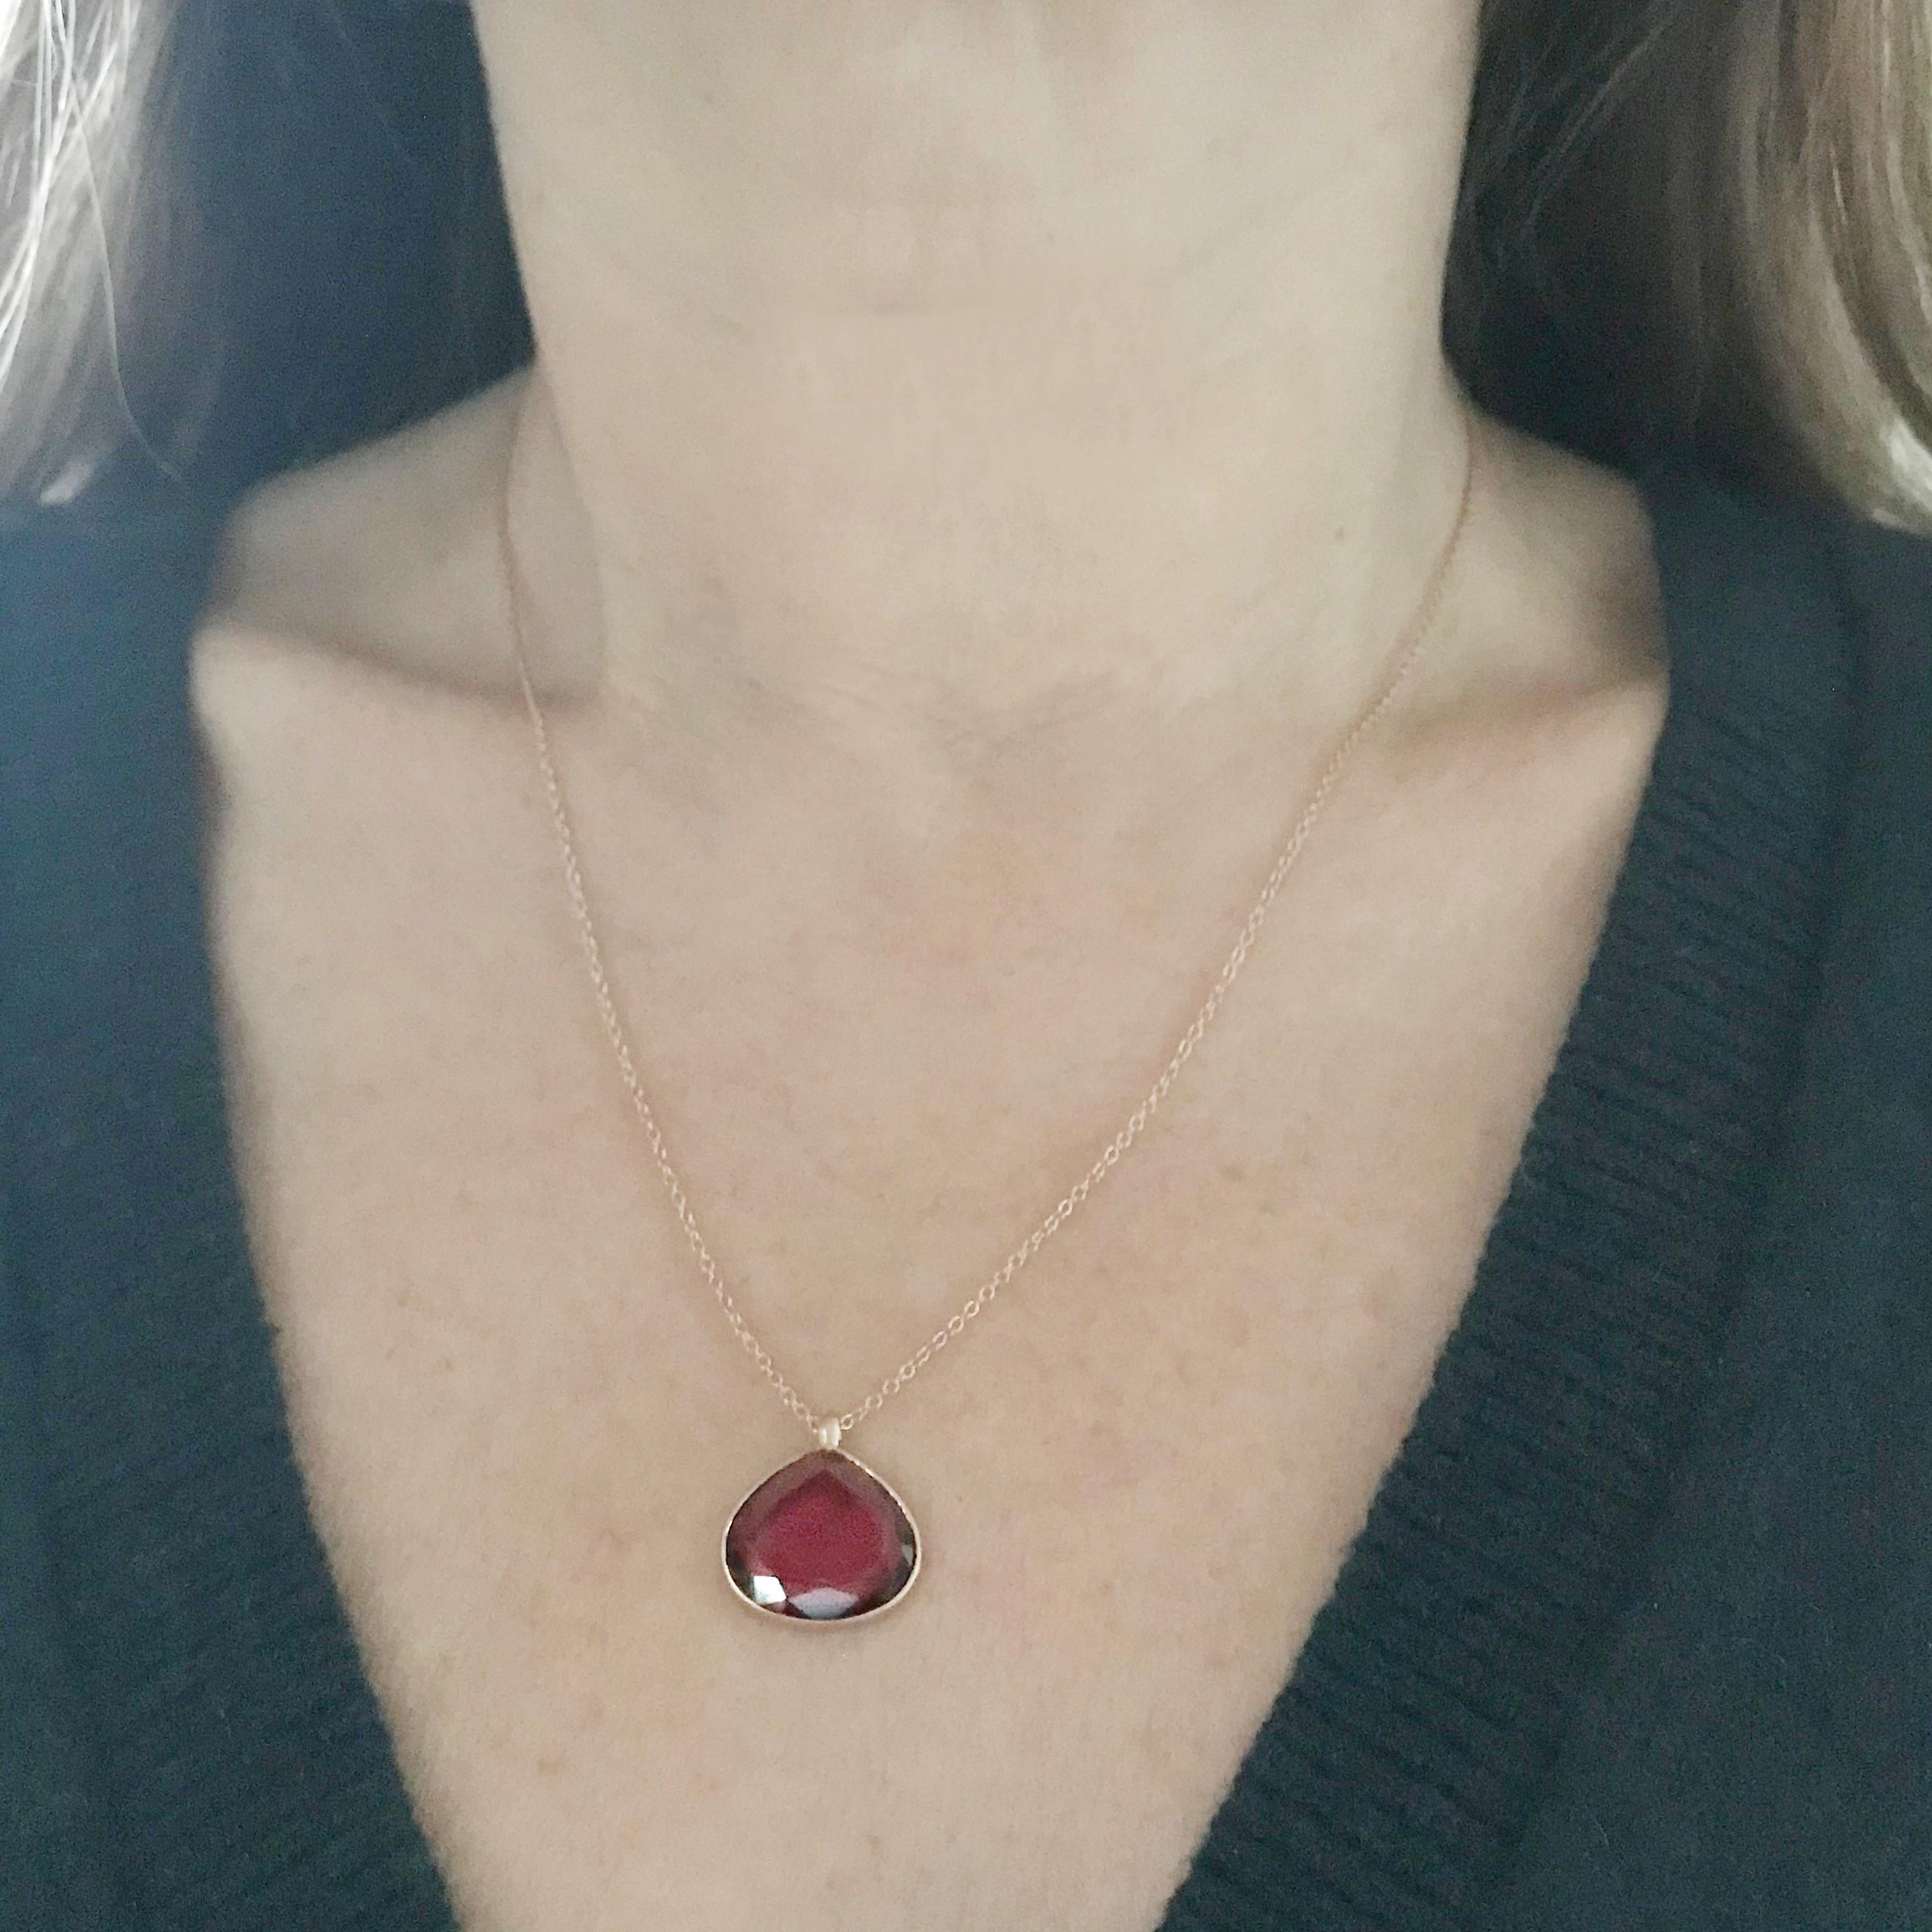 Dalben design  18k rose gold matte finishing pendant  with a bezel-set  faceted drop shape Red Tourmaline weight 6,08 carat. 
pendant dimension : 
width 16,8 mm
height 15 mm
Chain length 46 cm resizable
The necklace has been designed and handcrafted